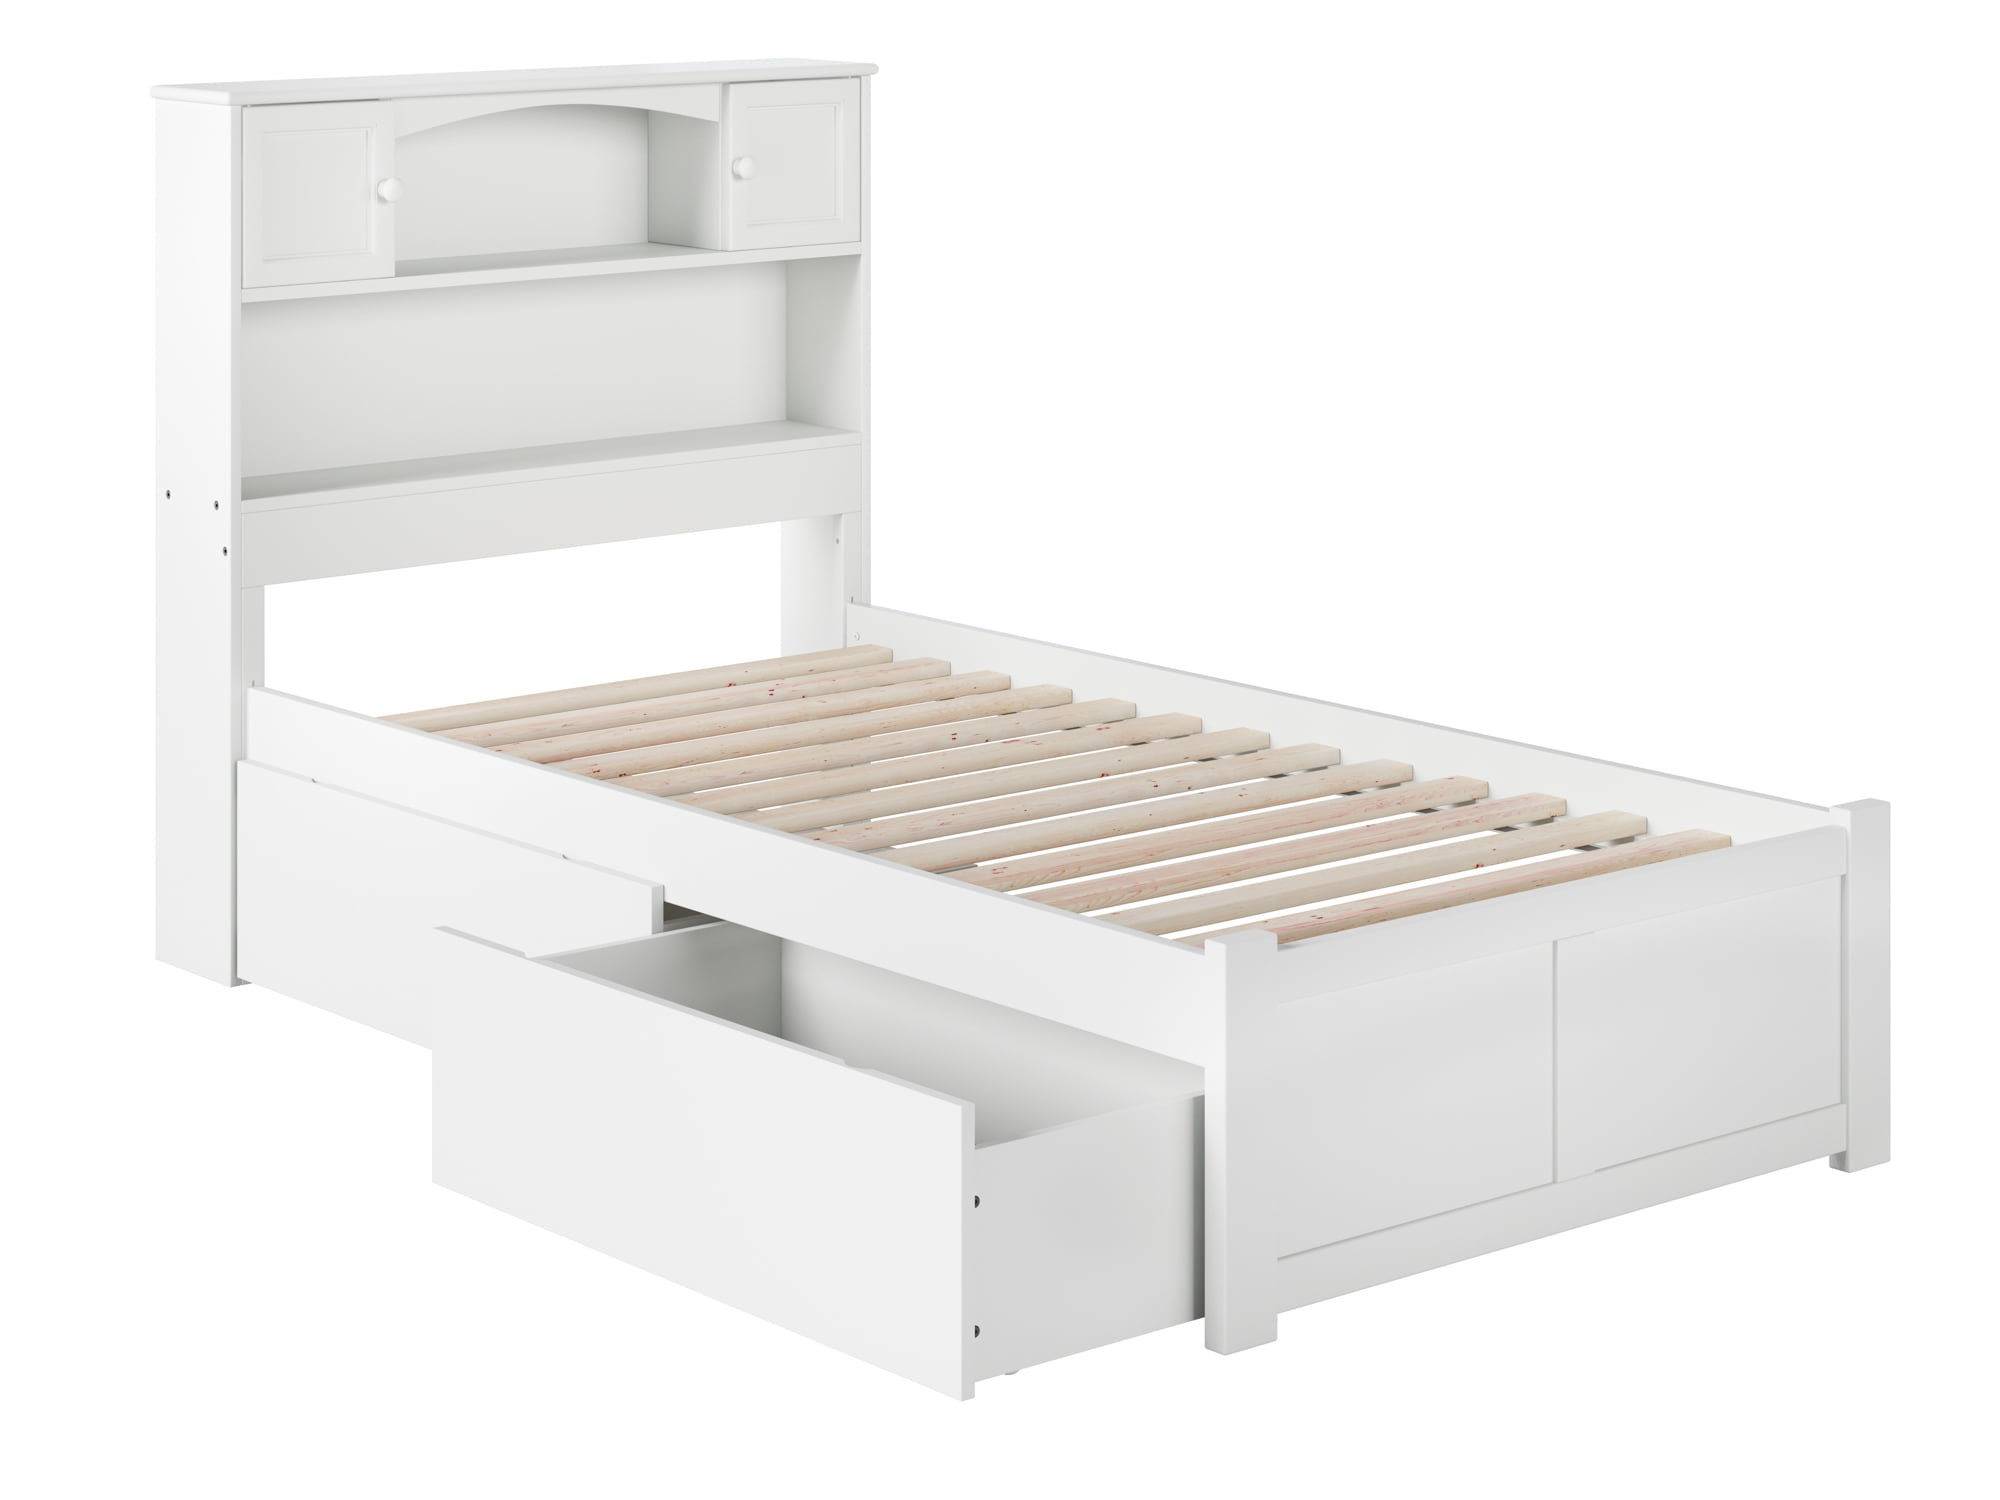 Picture of Atlantic Furniture AR8512112 Newport Flat Panel Foot Board with Urban Bed Drawers, White - Twin Extra Large